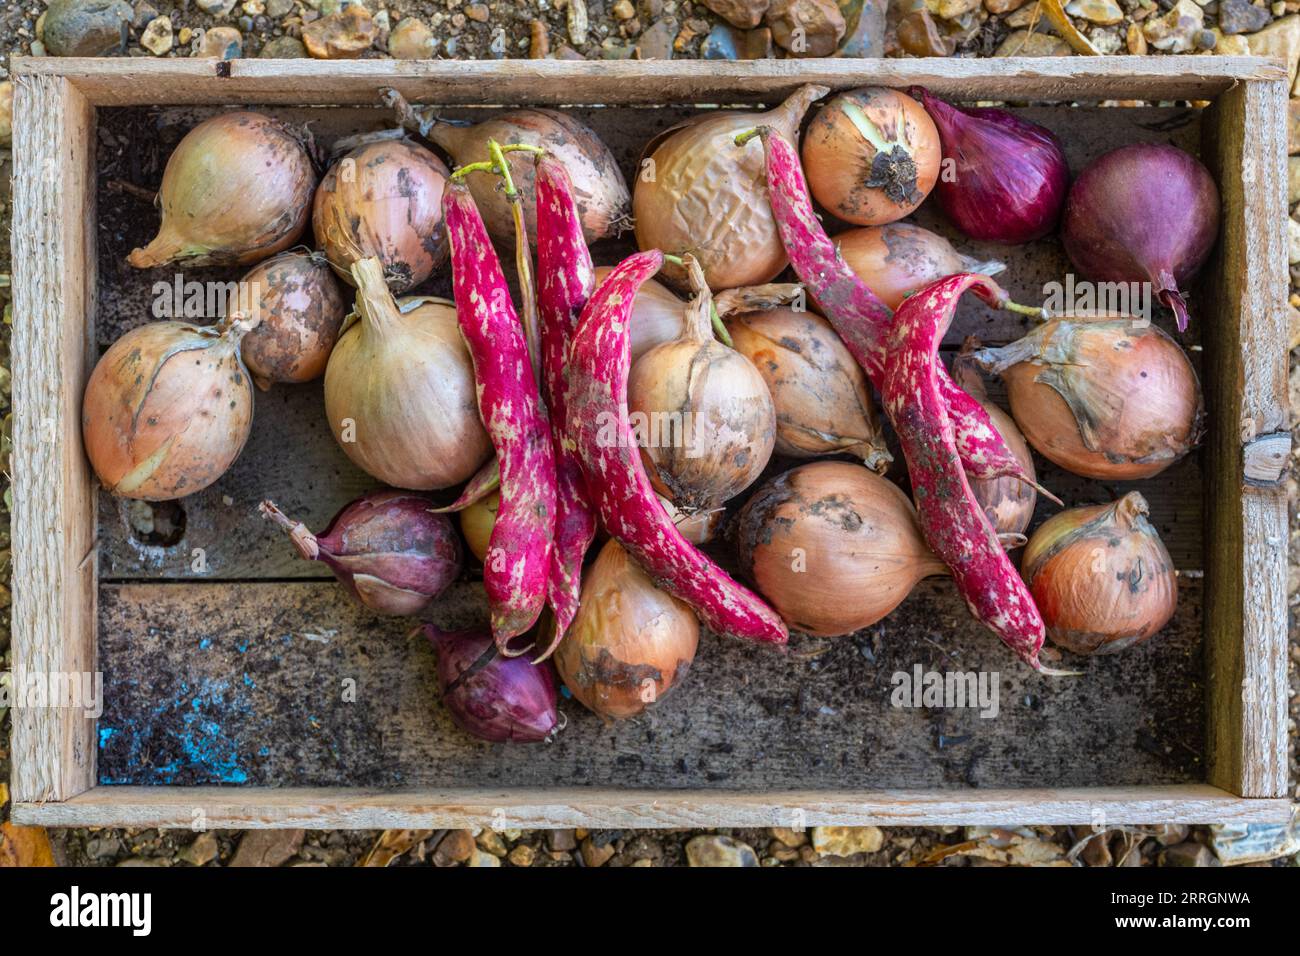 Onions and borlotti beans in a wooden seed tray, seed box, vegetable gardening, UK Stock Photo